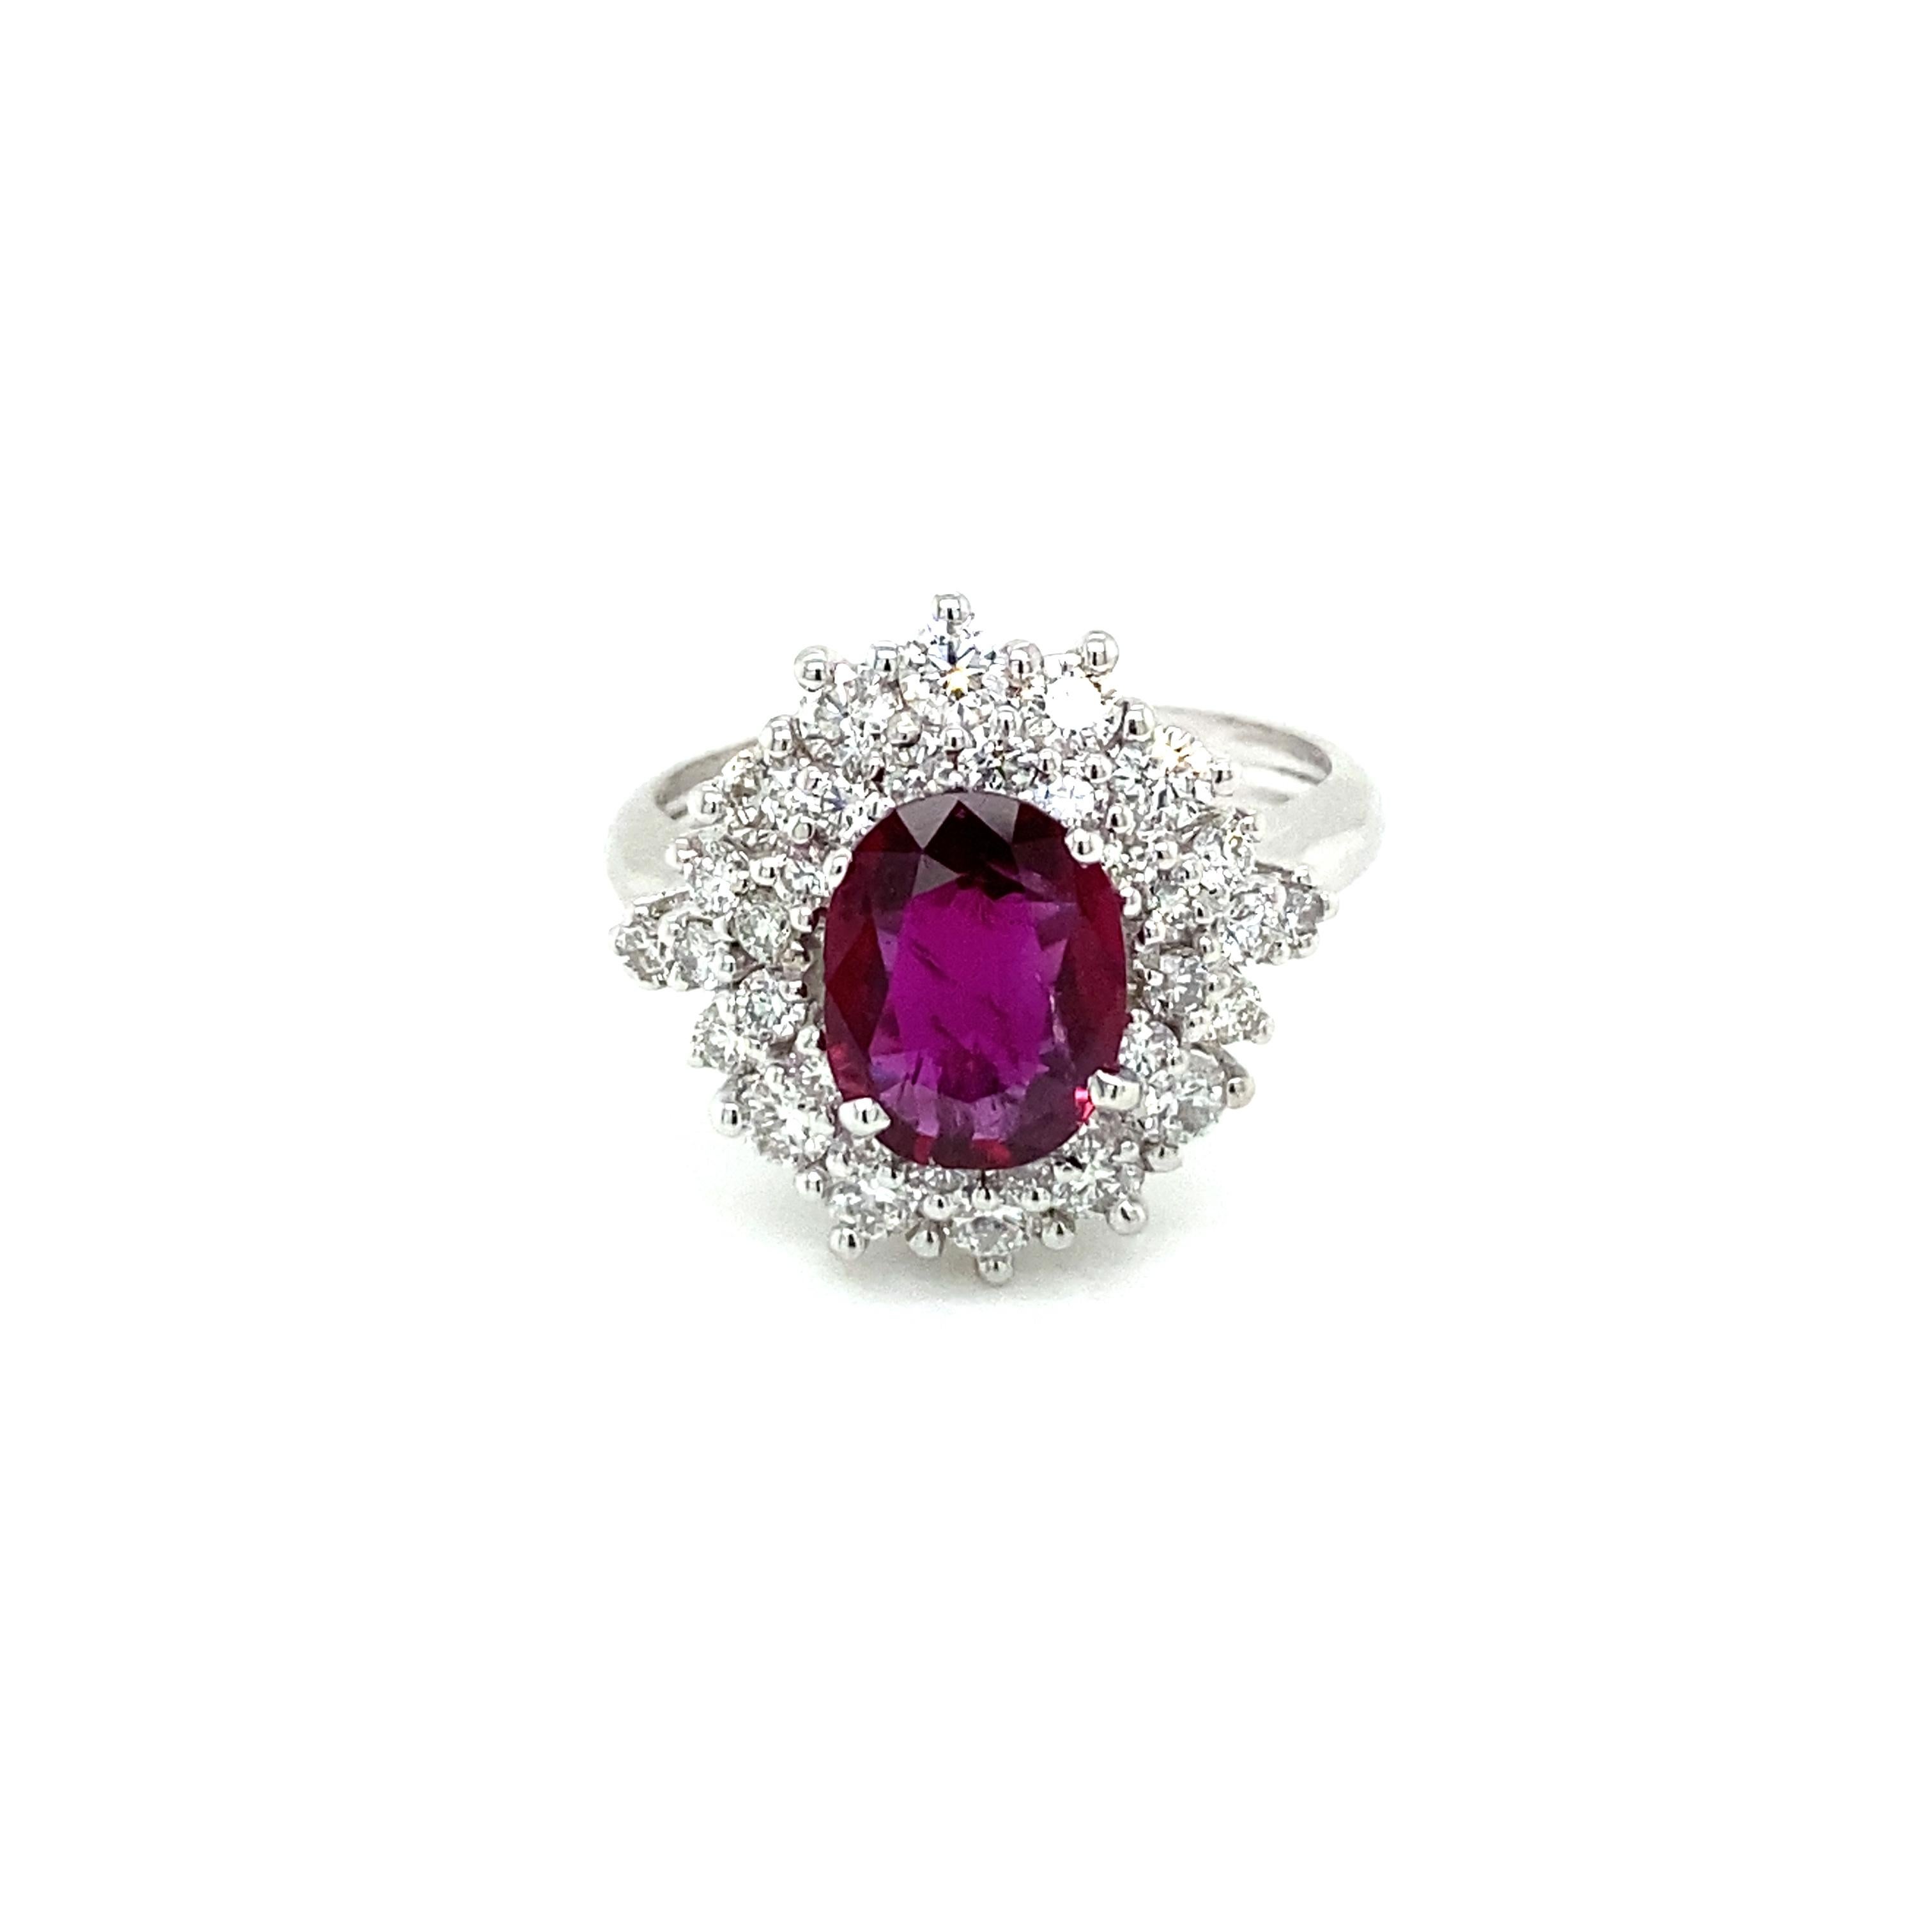 Mixed Cut Estate Certified 1.94 Carat Ruby Diamond Cluster Ring For Sale